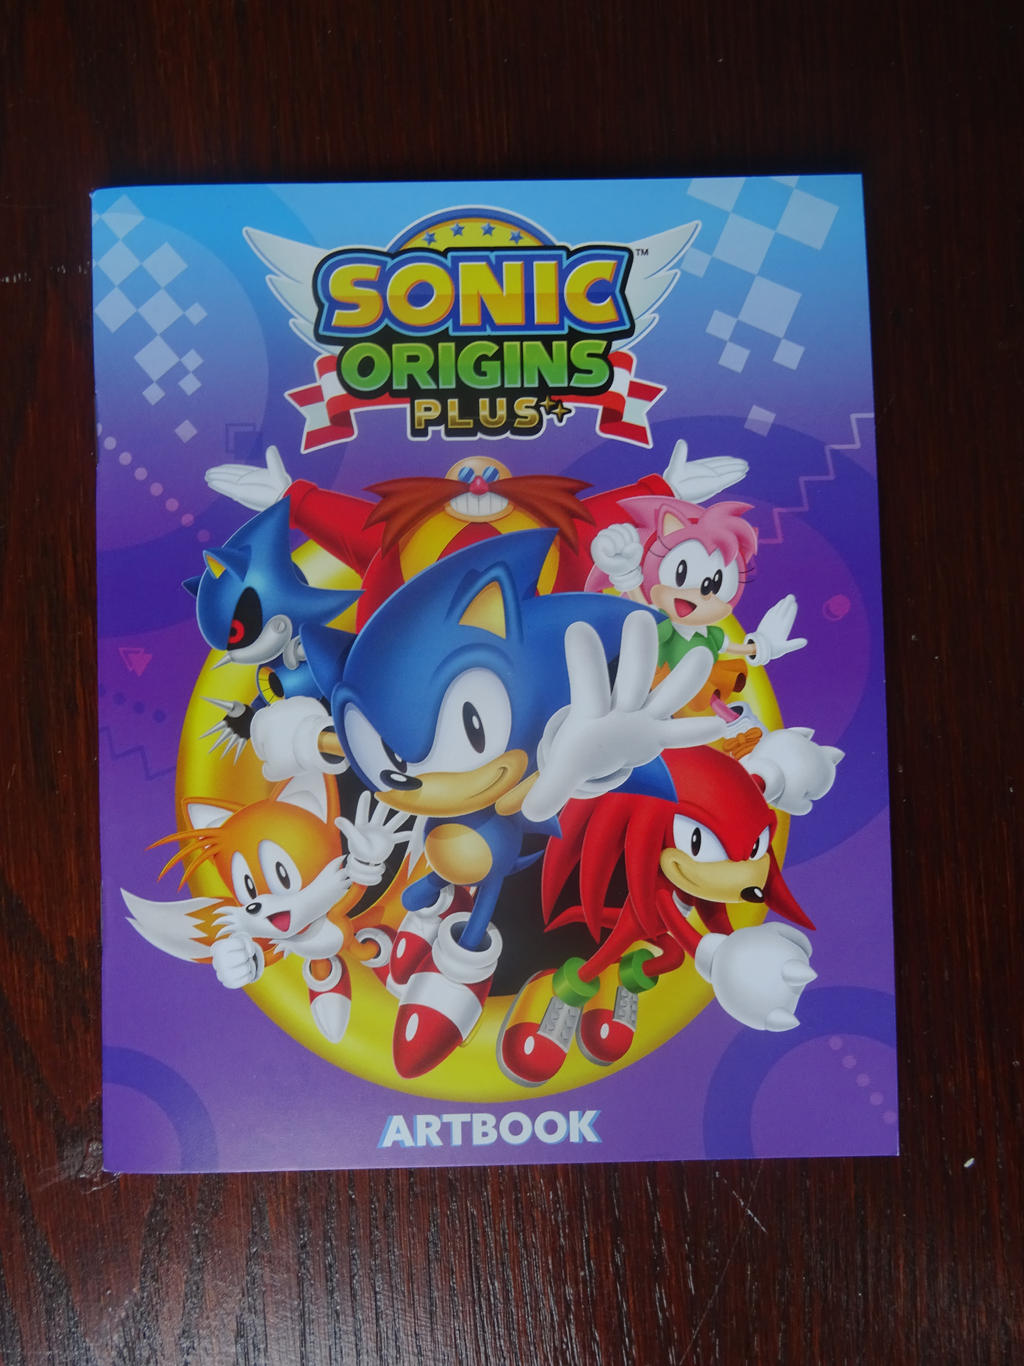 TGDB - Browse - Game - Sonic Mania Plus [Artbook Edition]